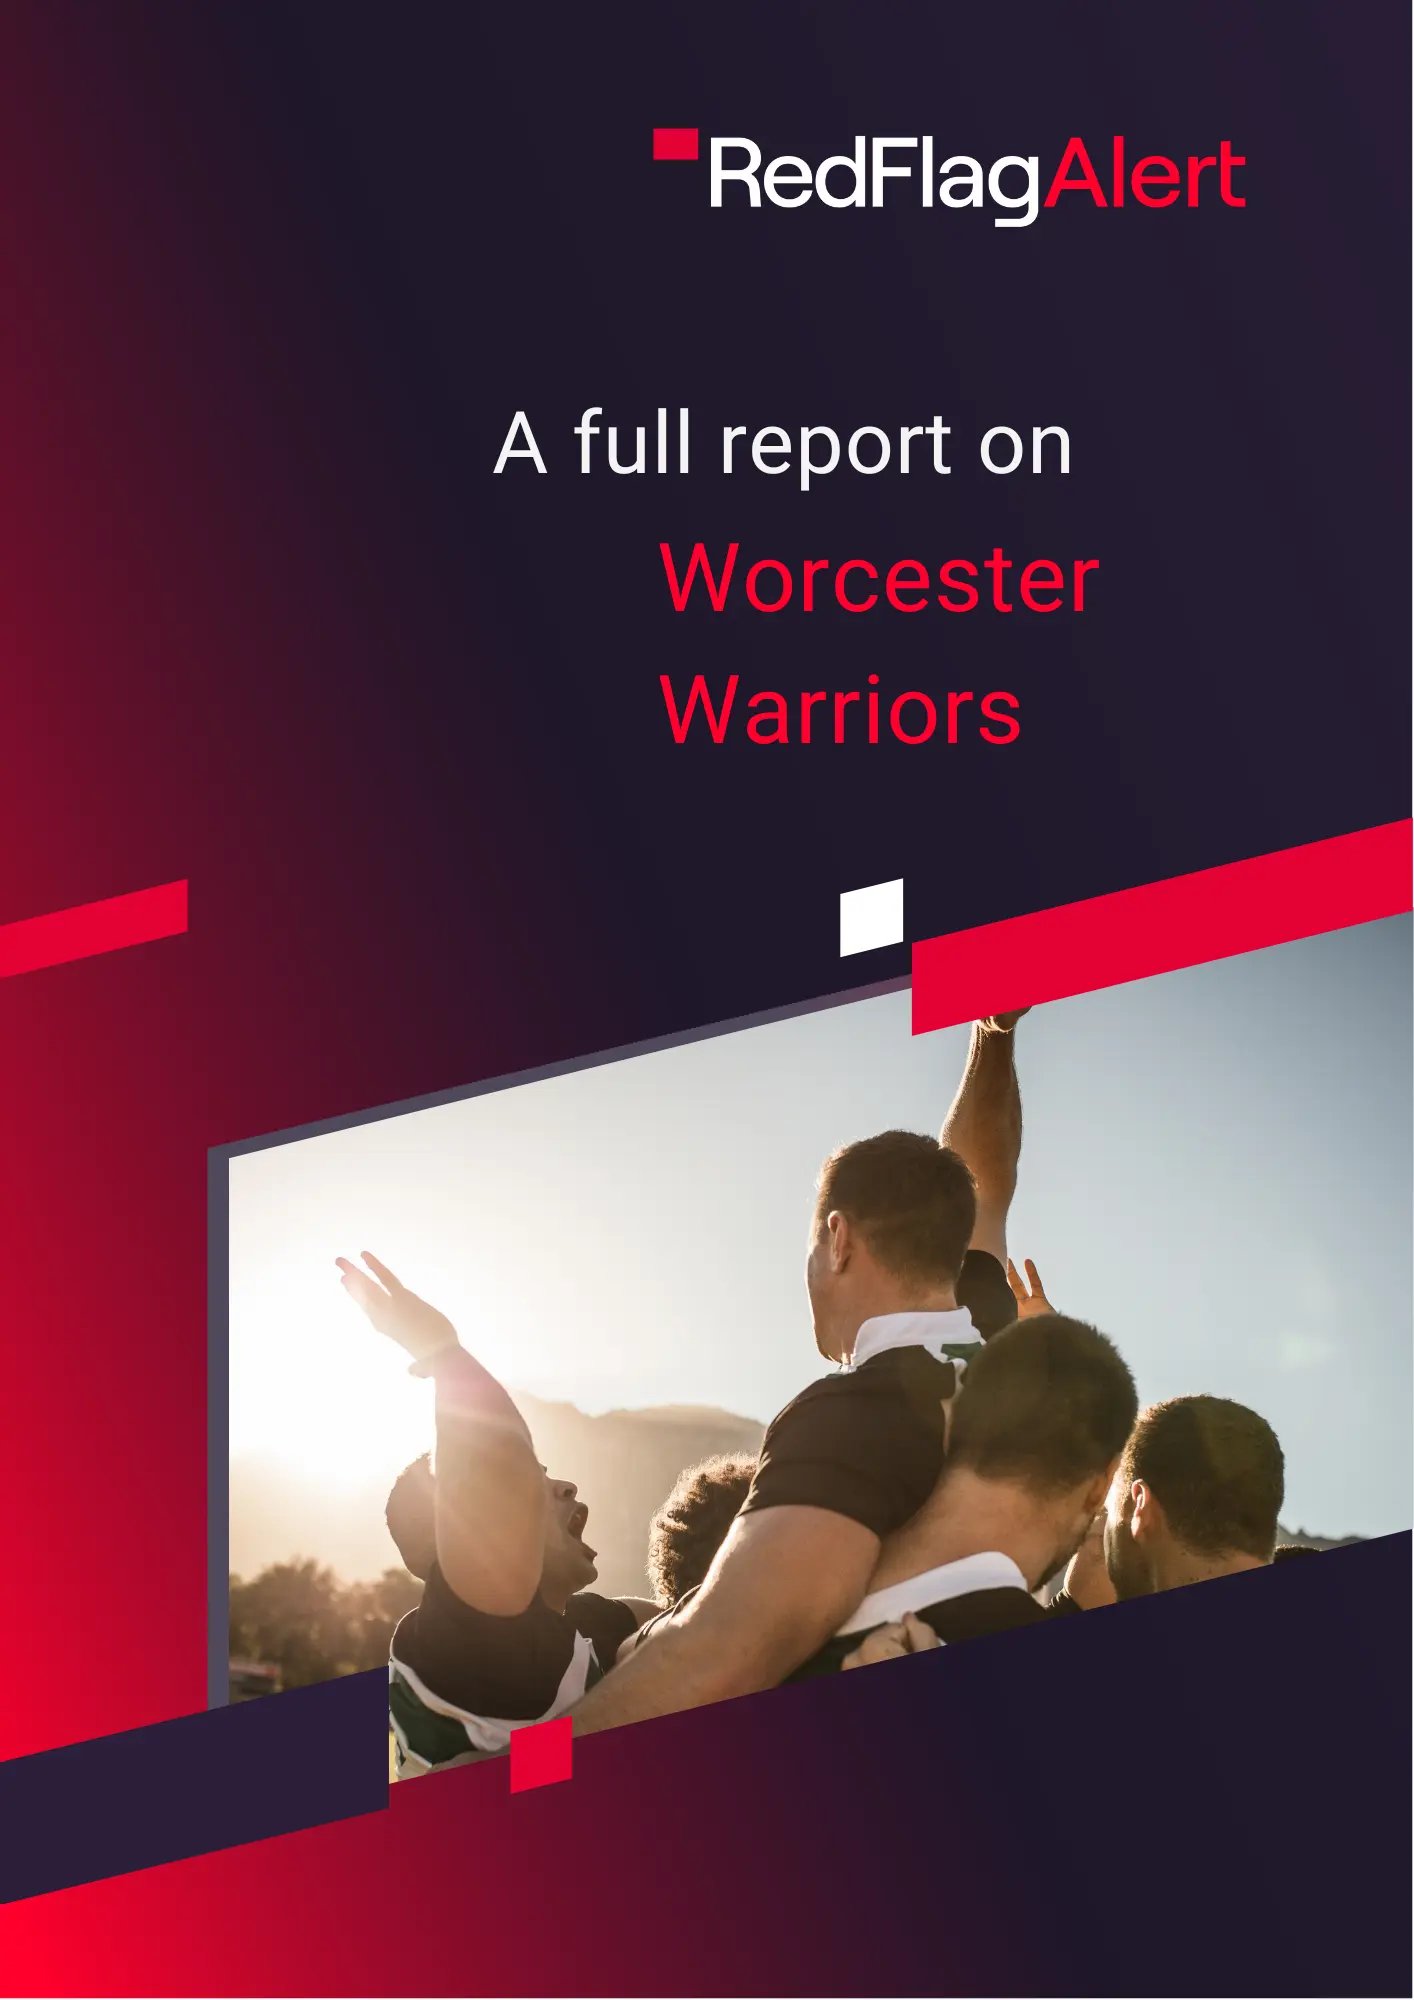 Full report on Worcester Warriors